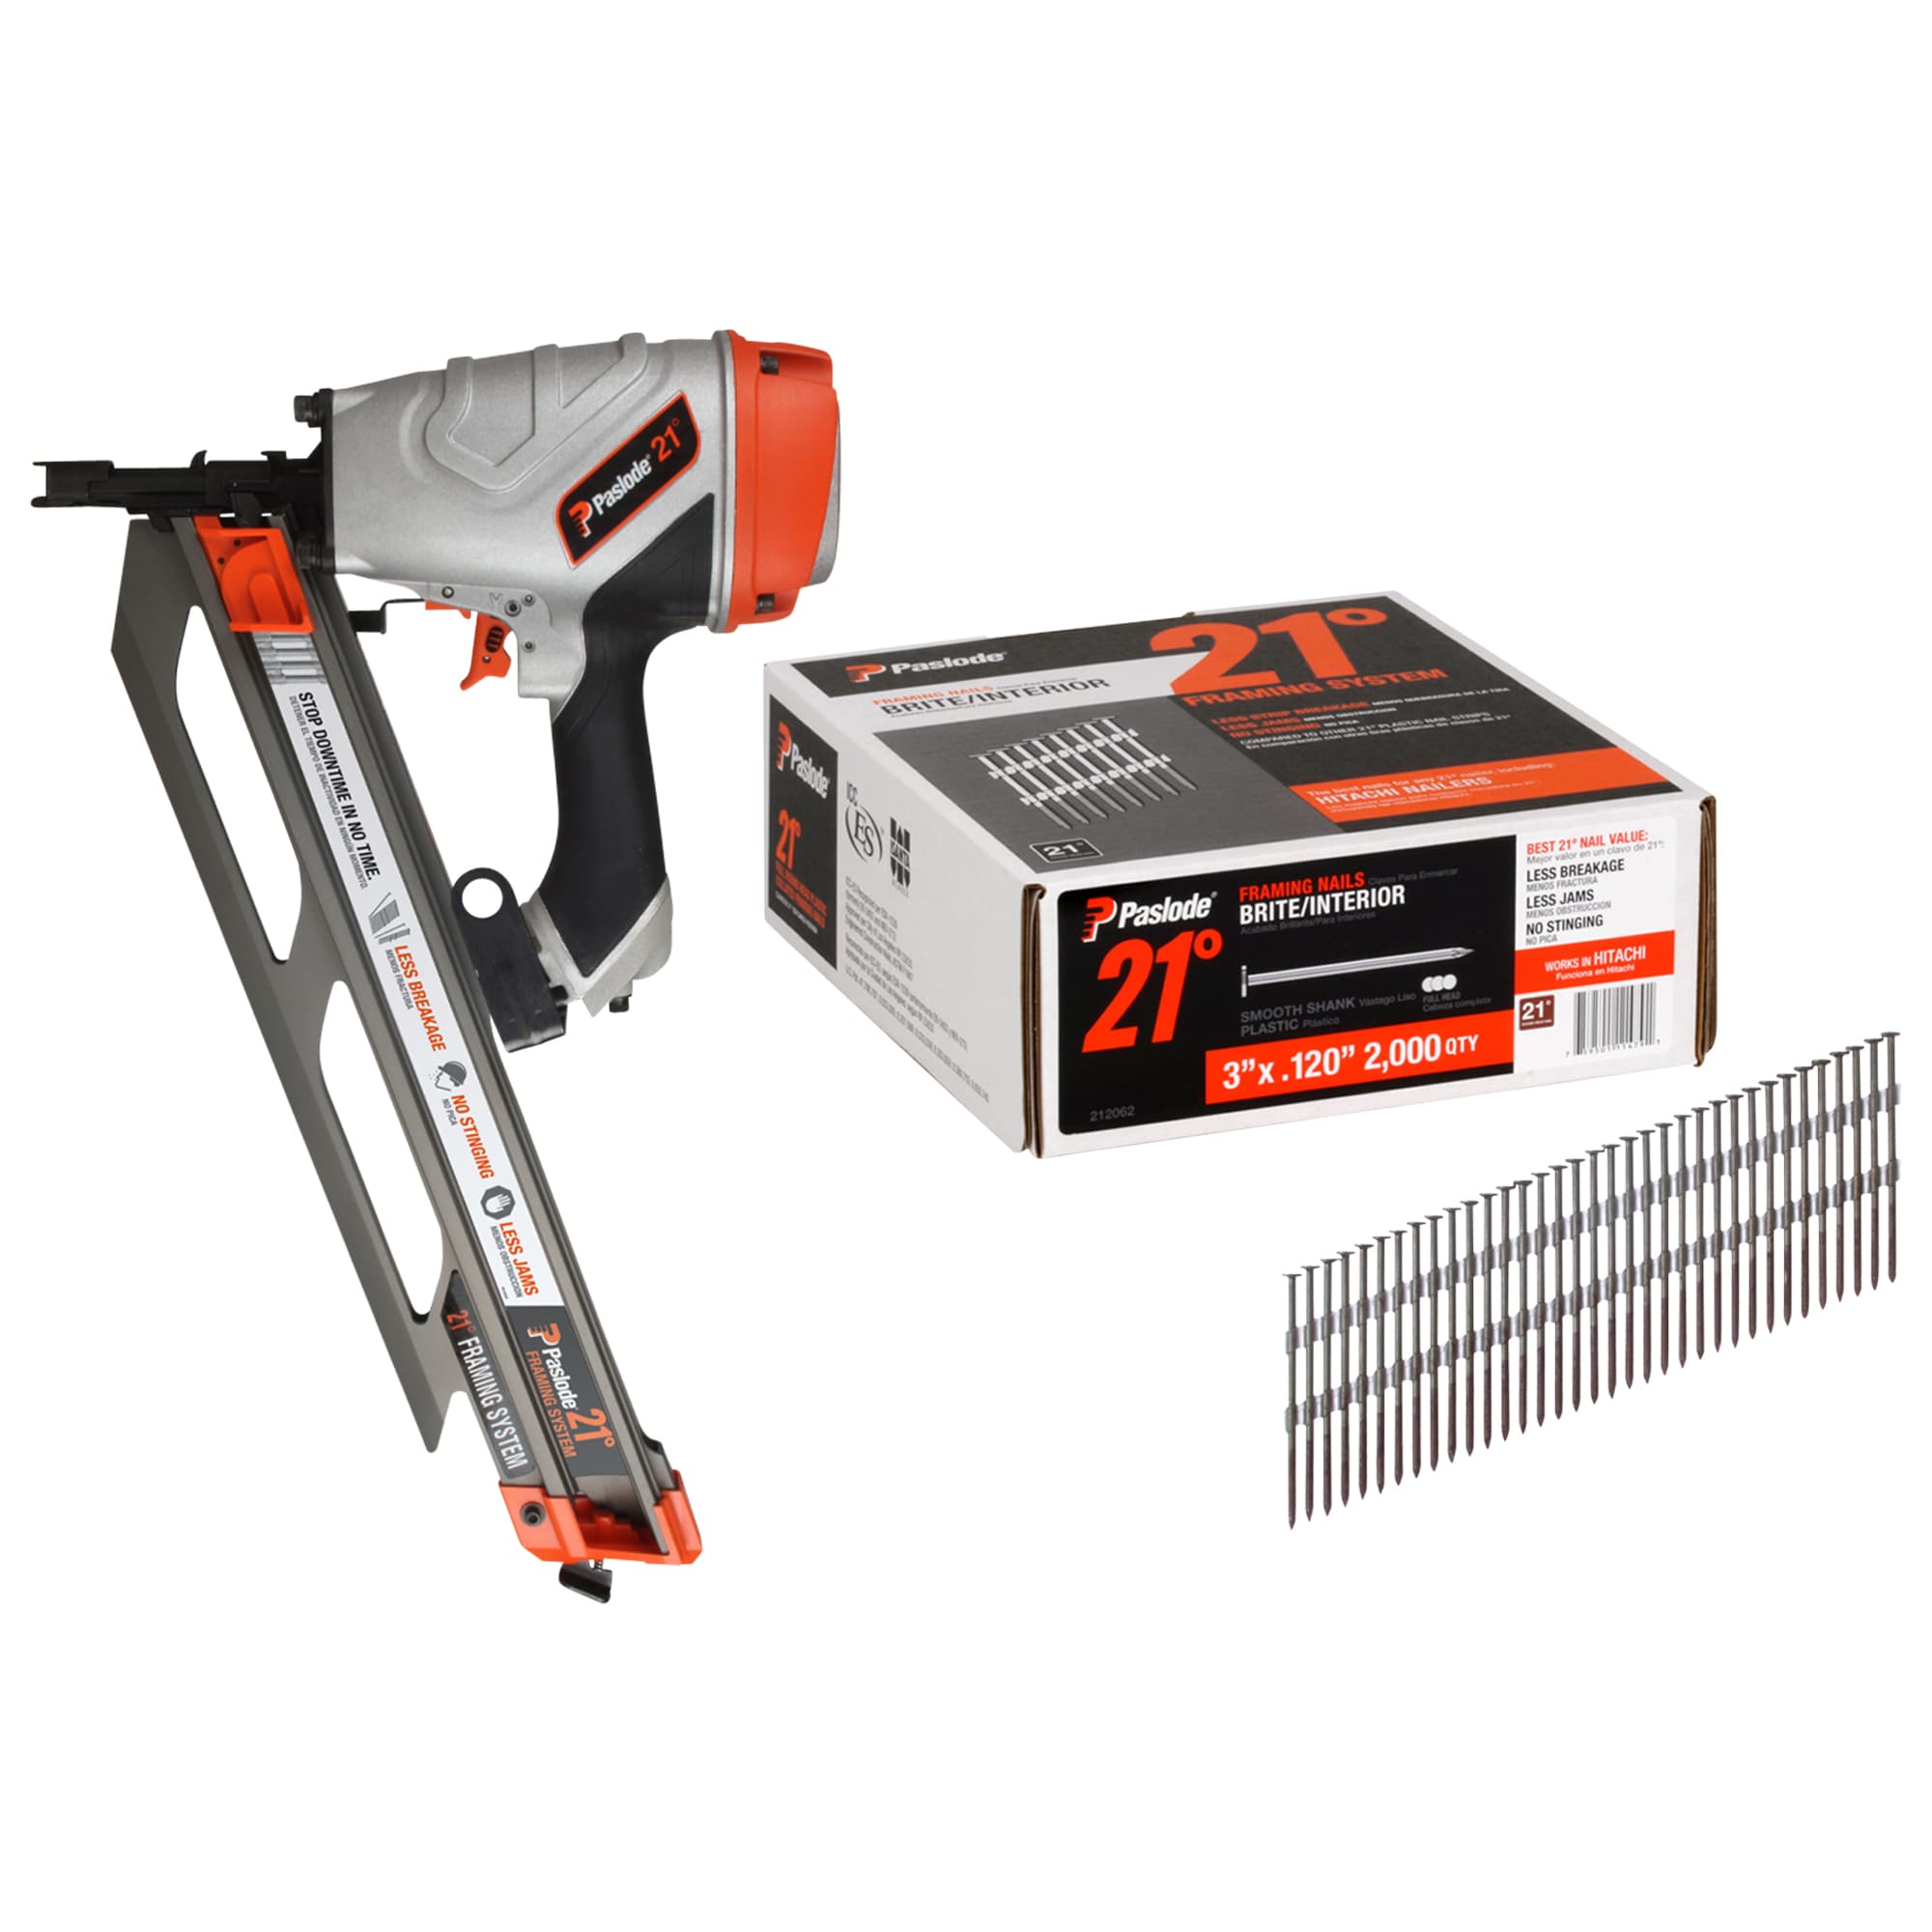 10 Best Nail Guns For Concrete 2020 - YouTube